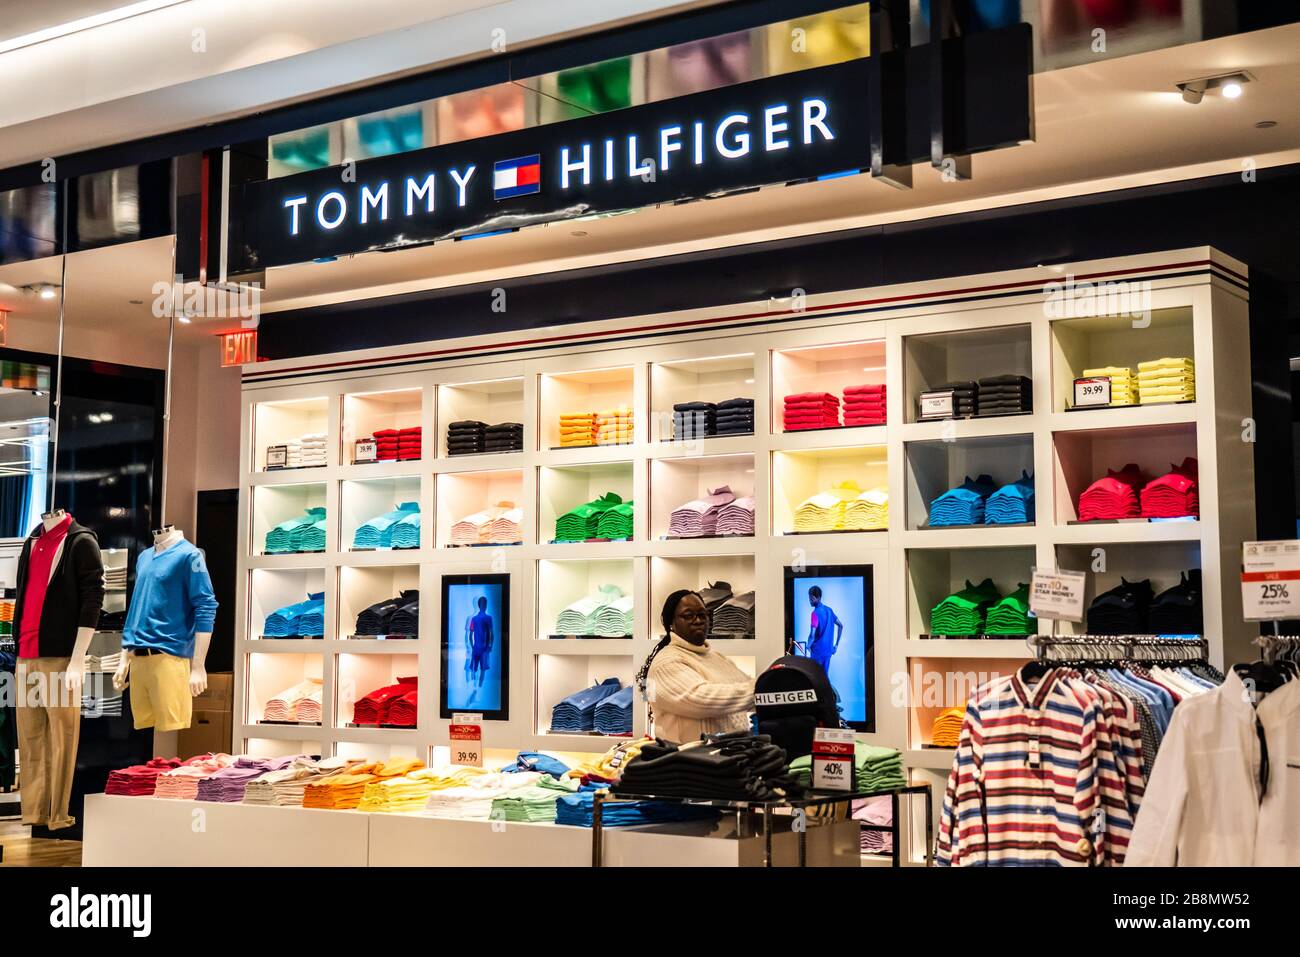 American premium clothing Hilfiger stall seen in a Macy's department store in New York City Stock Photo - Alamy